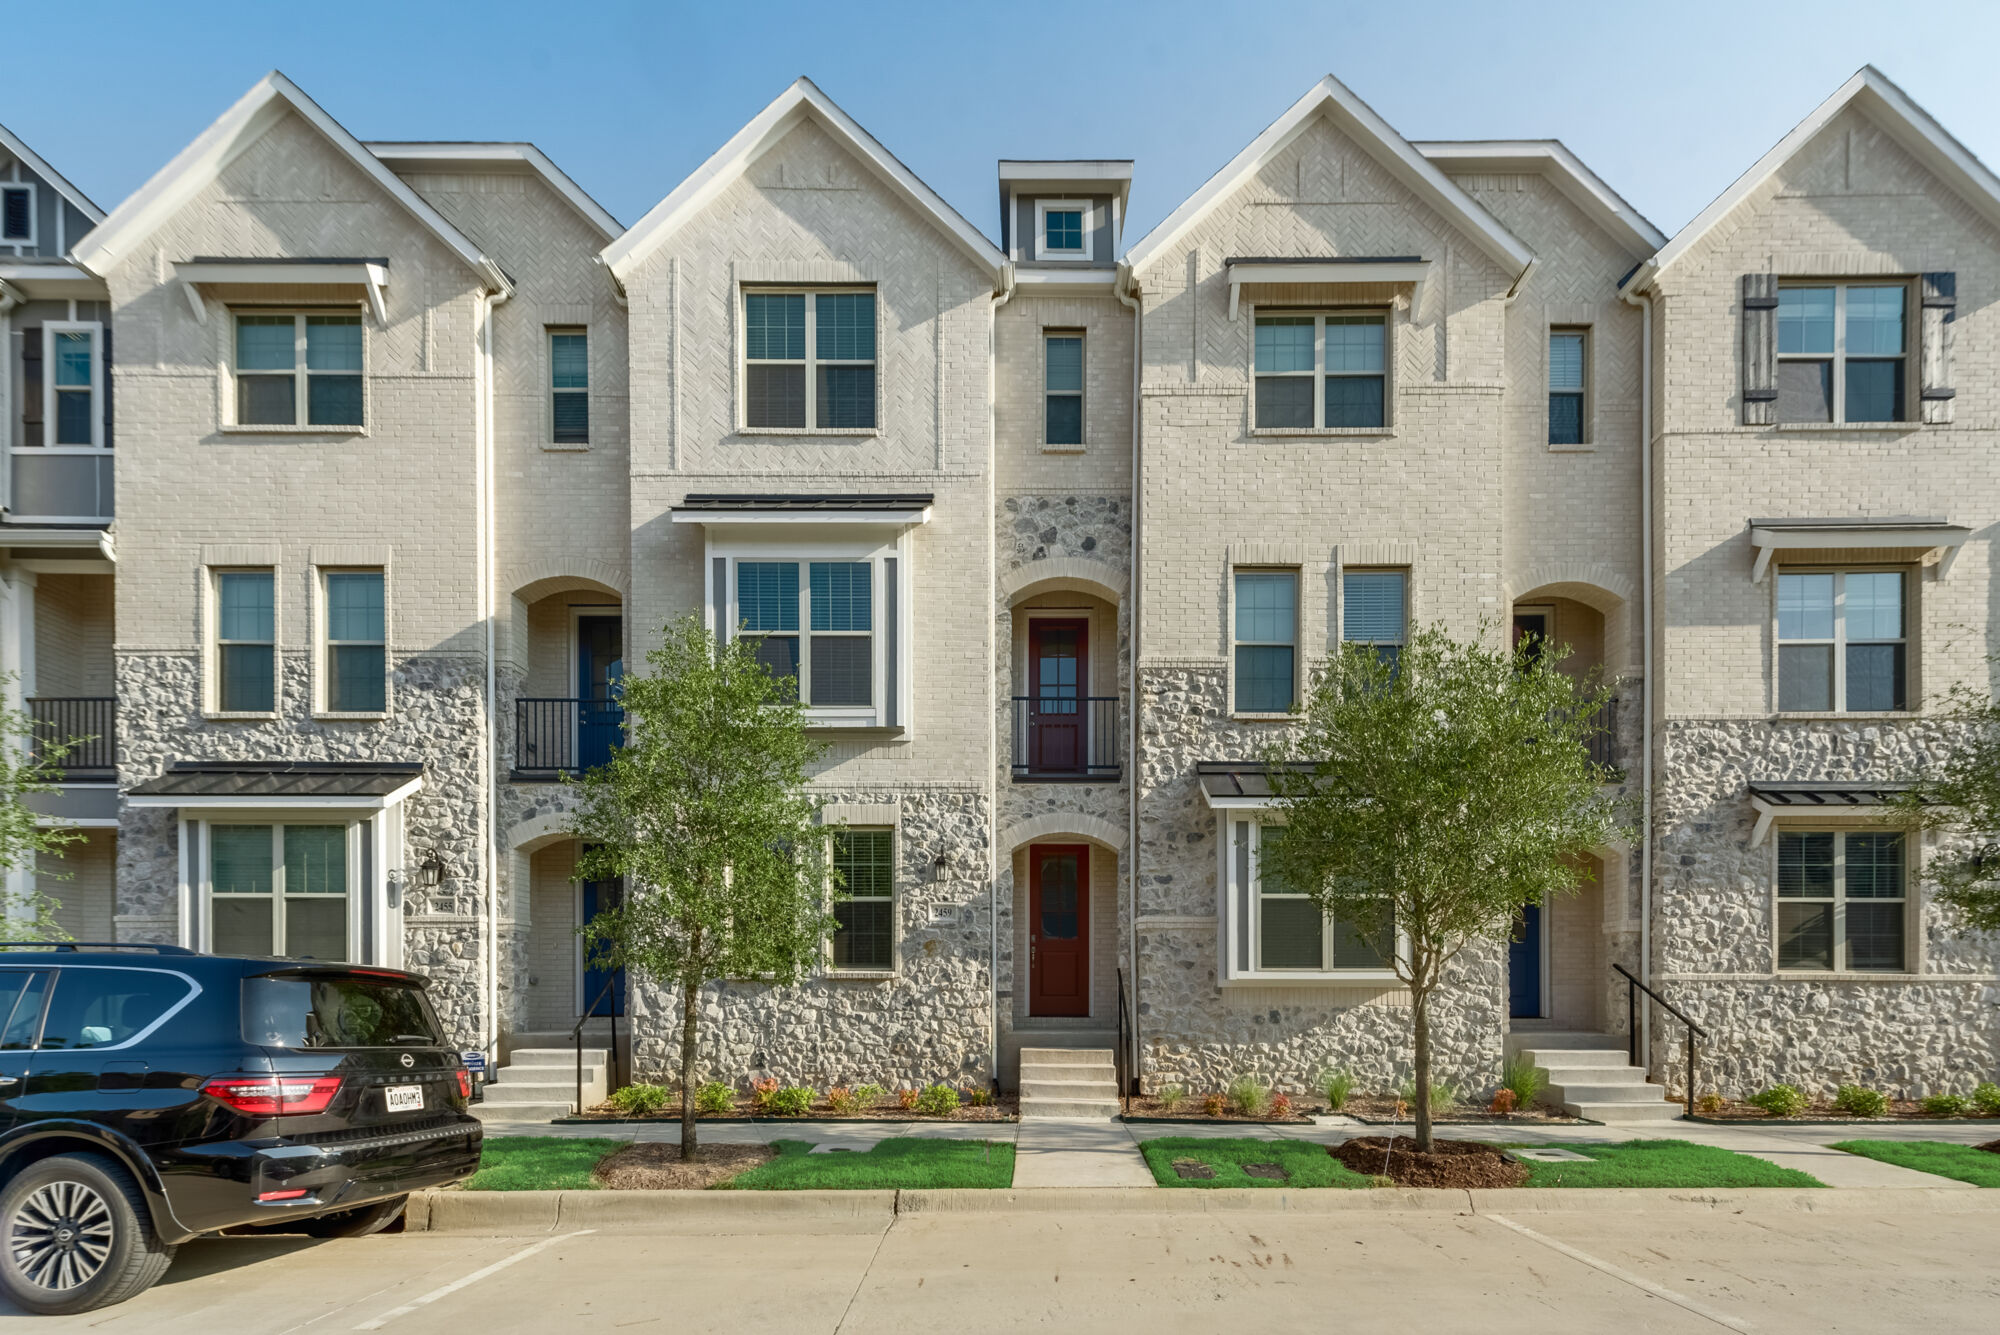 New Homes for sale Flower Mound TX